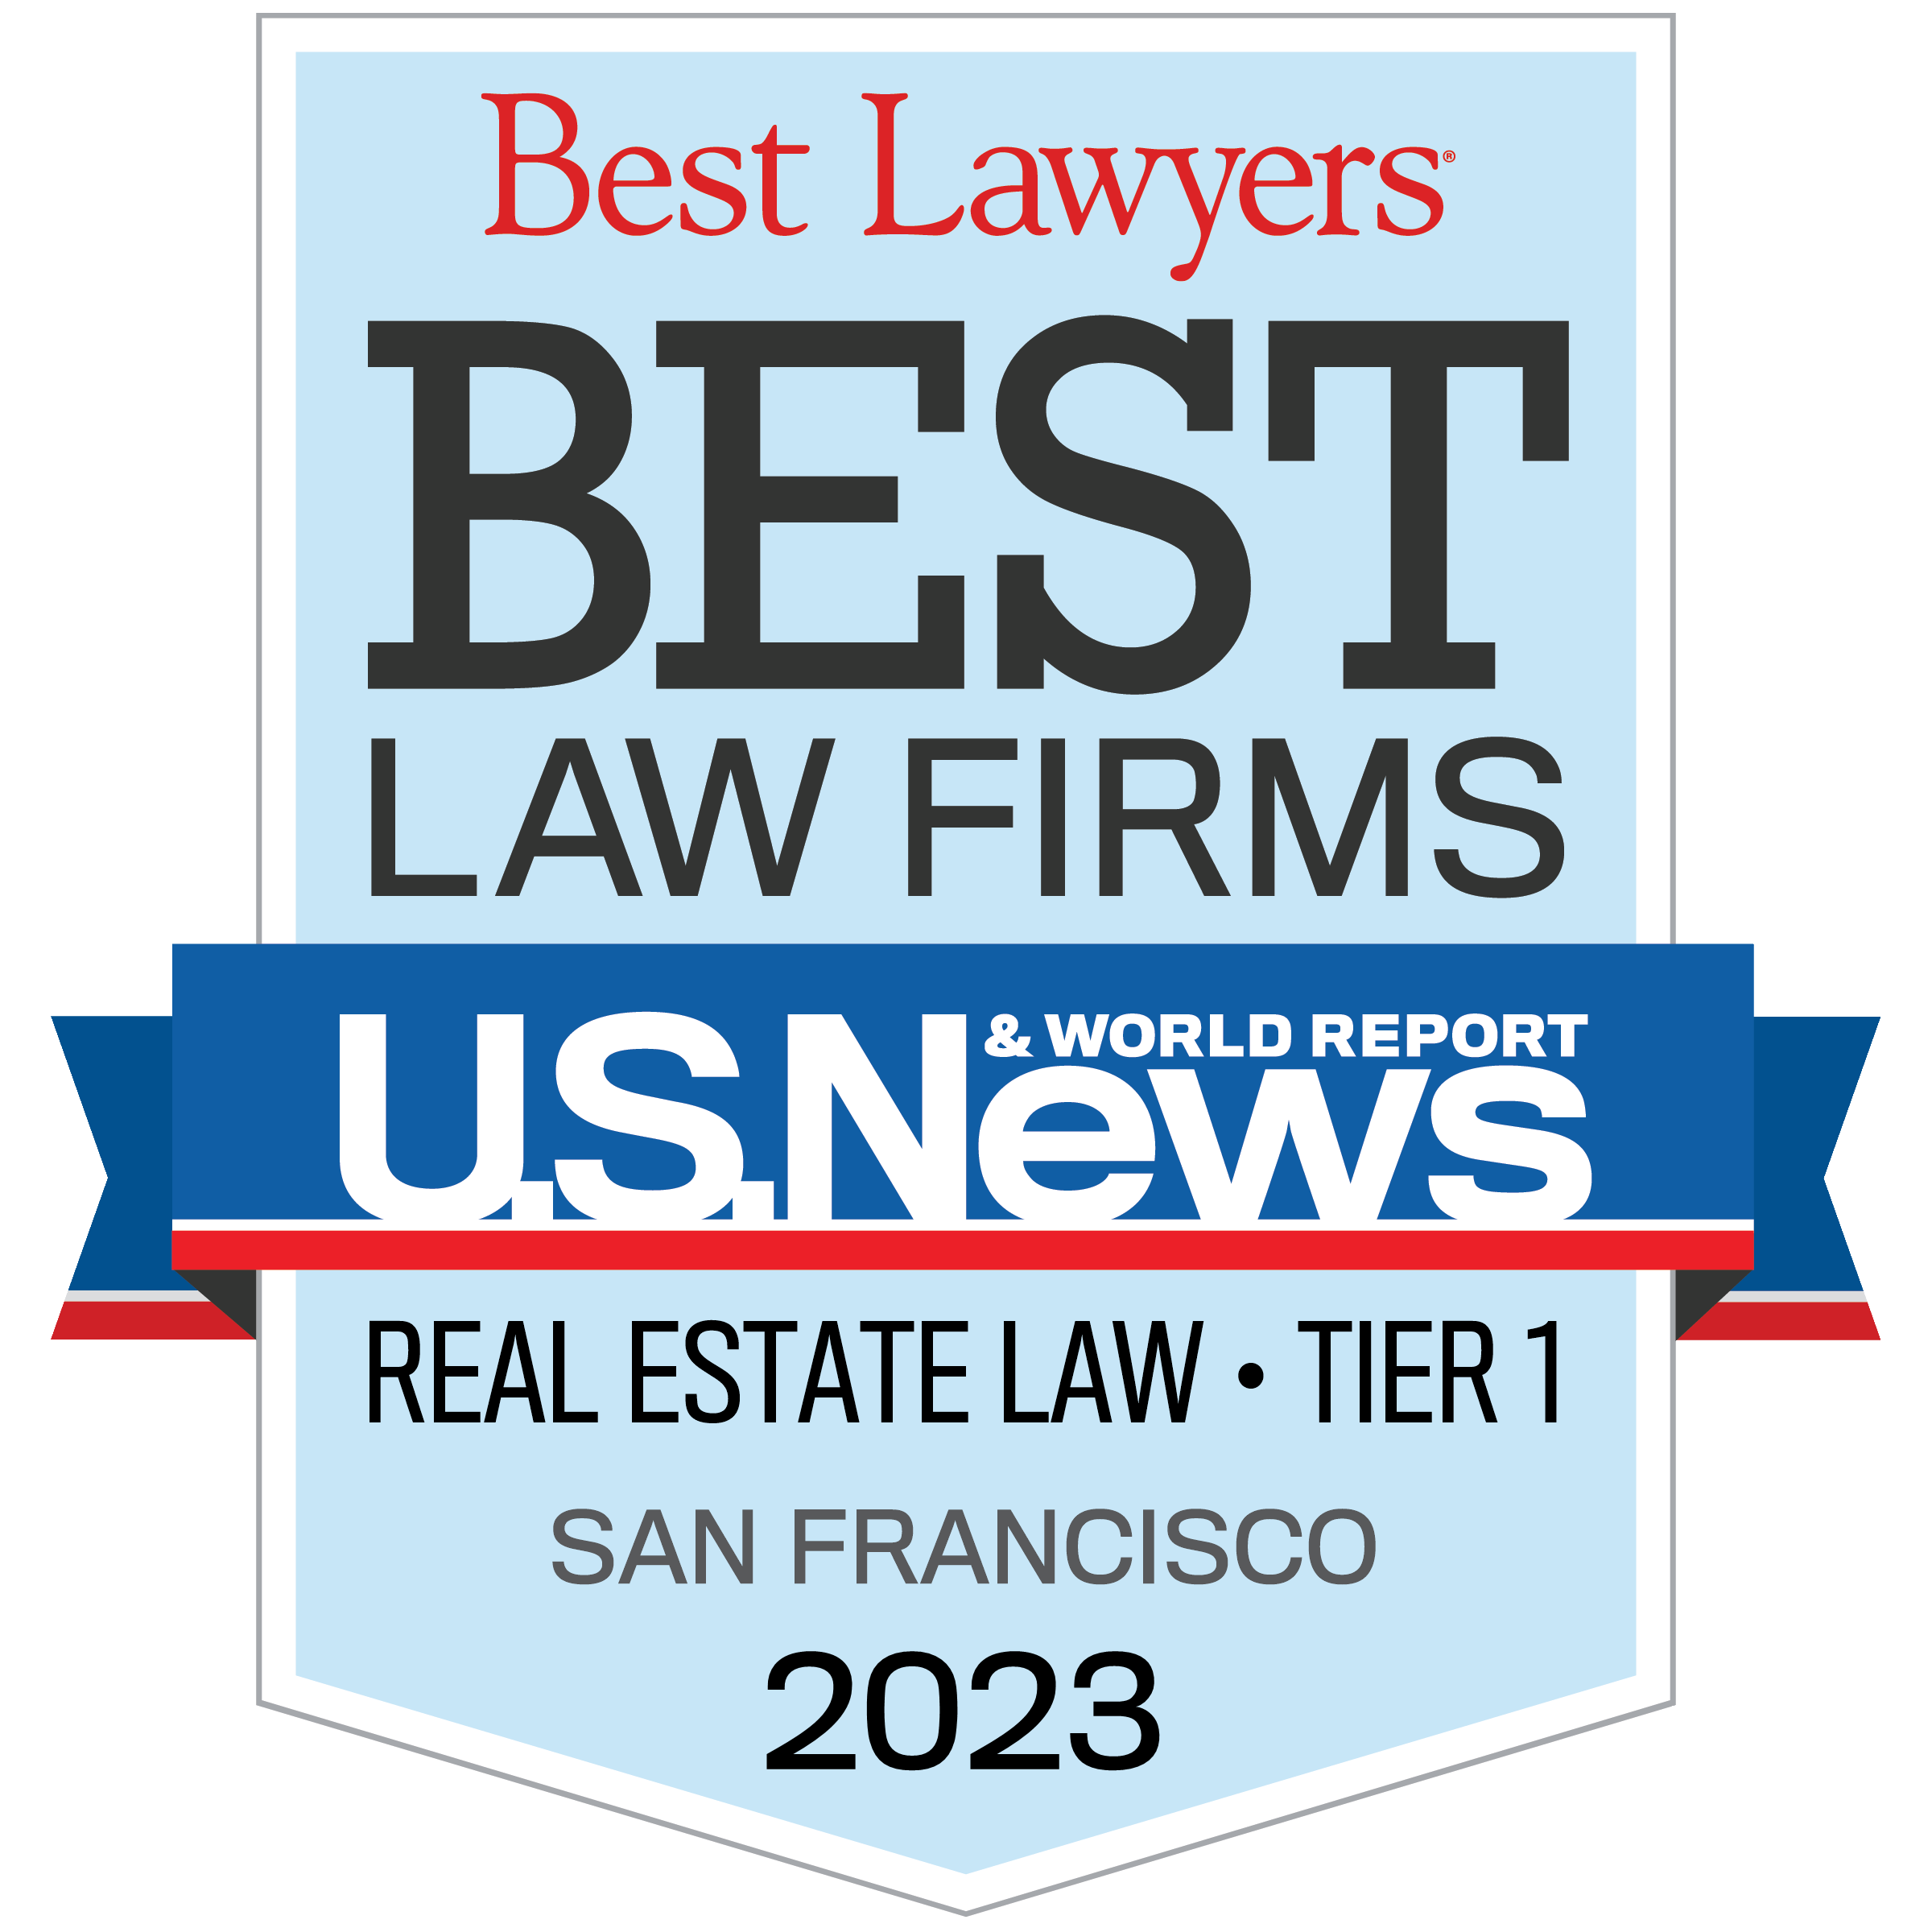 Best Lawyers - Best Law Firms - US News - Real Estate Law - Tier 1 - San Francisco 2023